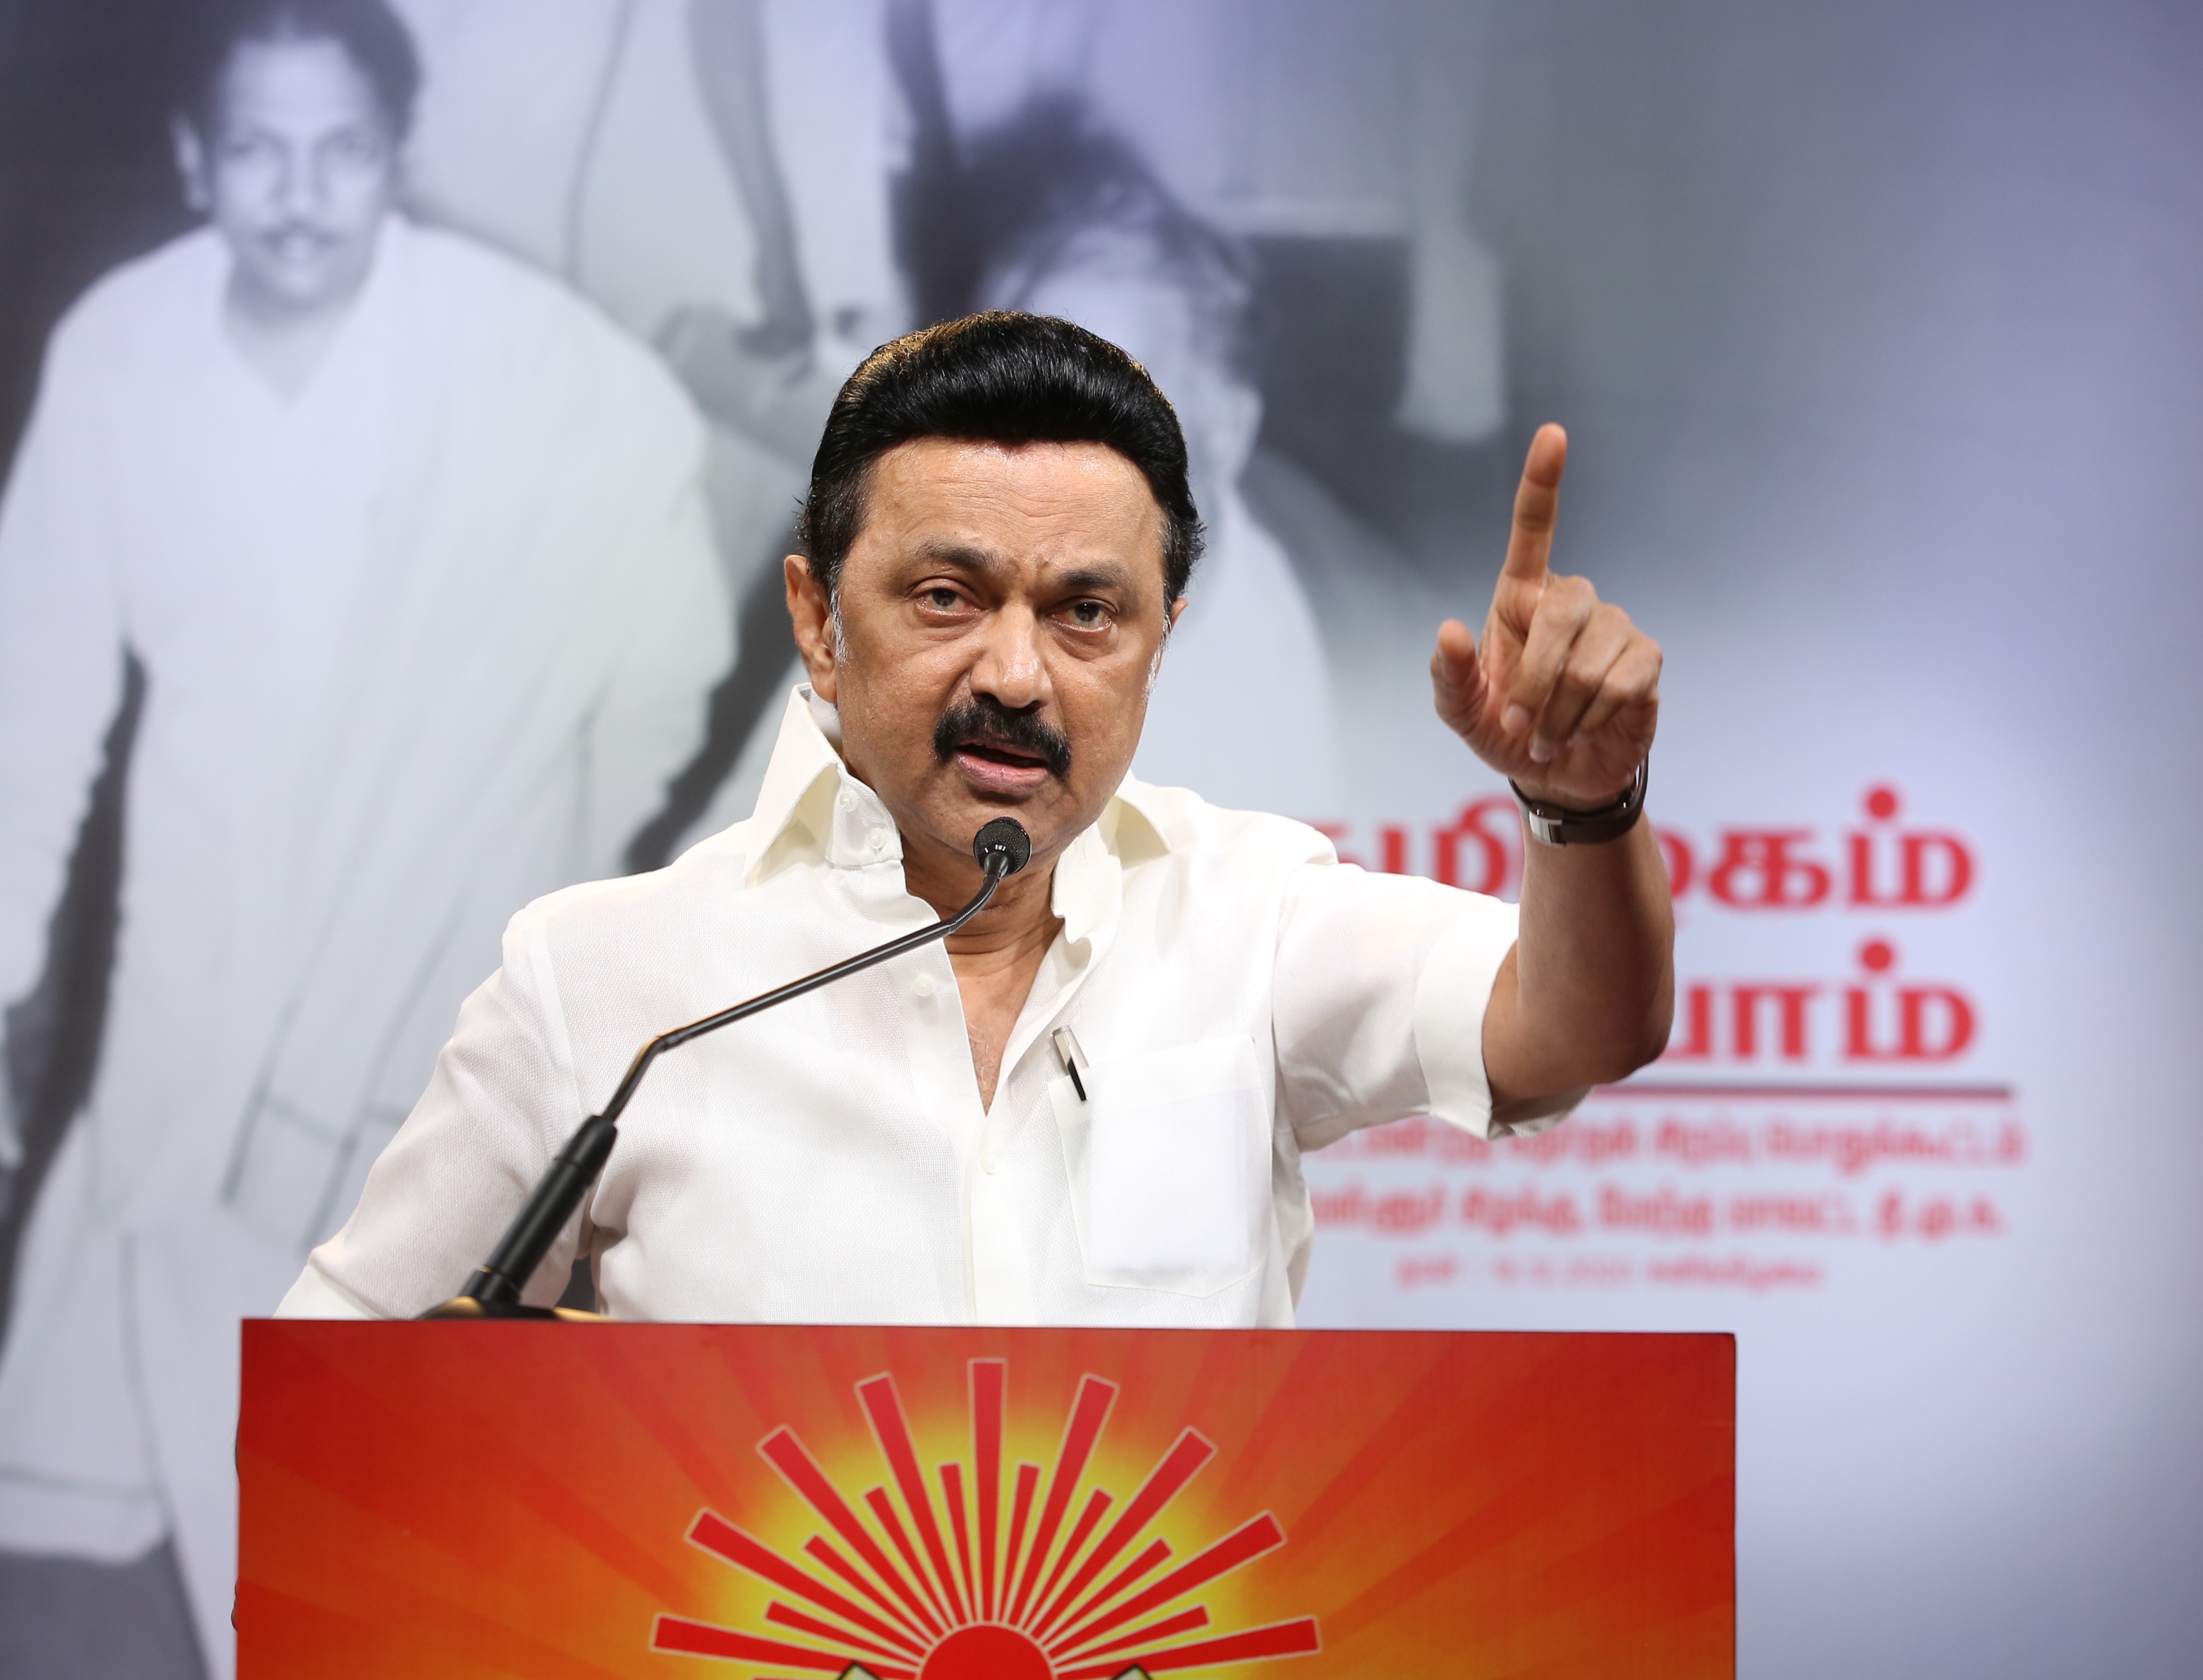 DMK Launches 'We Reject ADMK': Campaign in Poll-bound Tamil Nadu